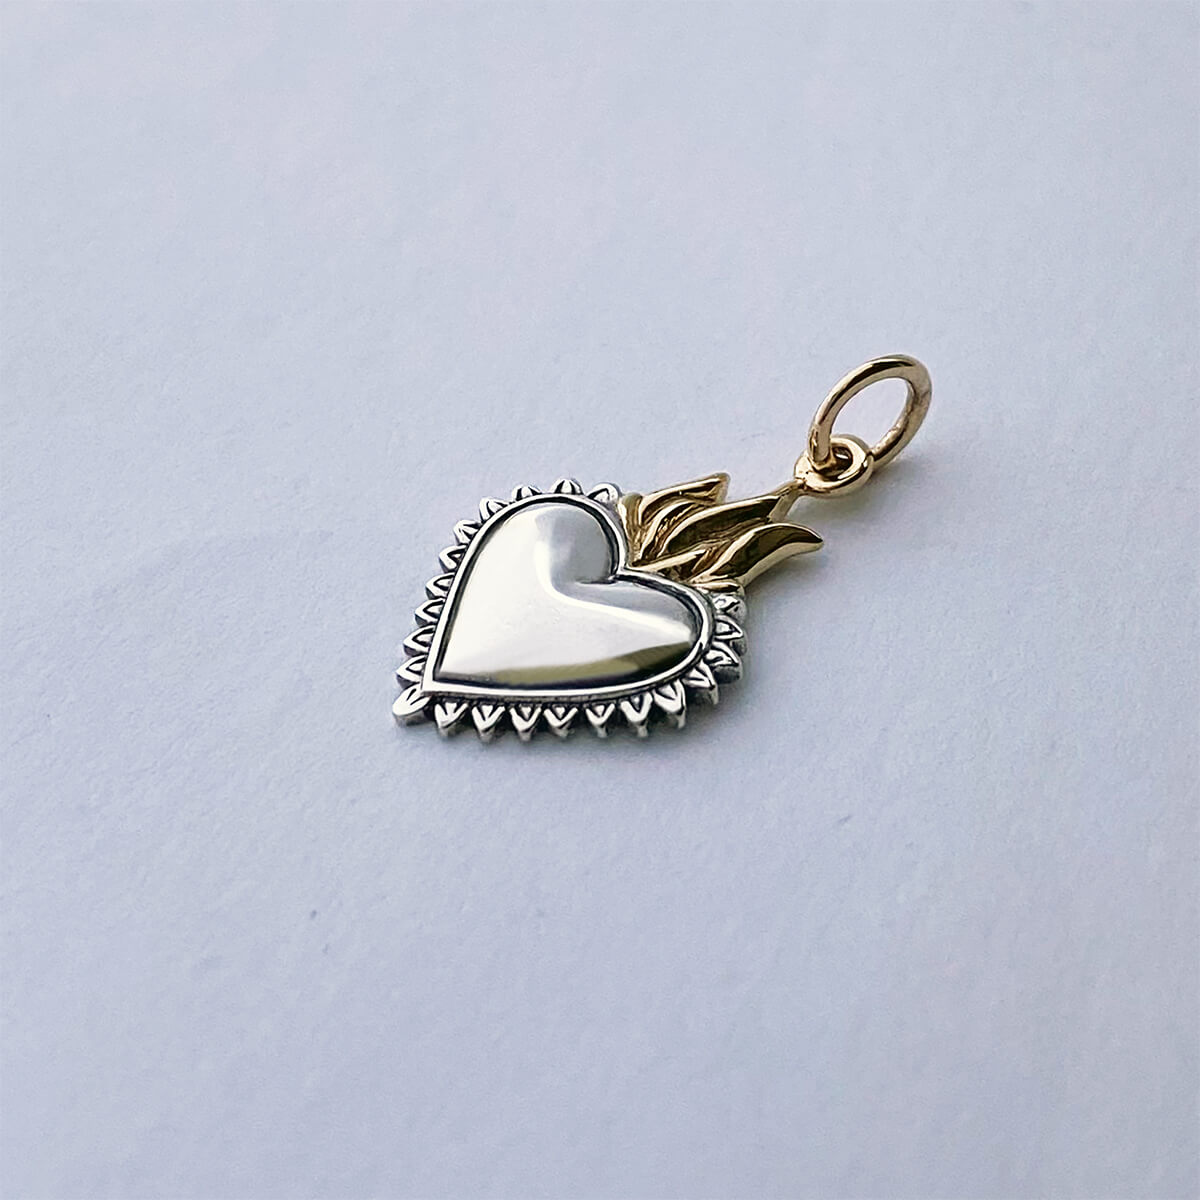 Flaming heart charm sterling silver and bronze religious pendant